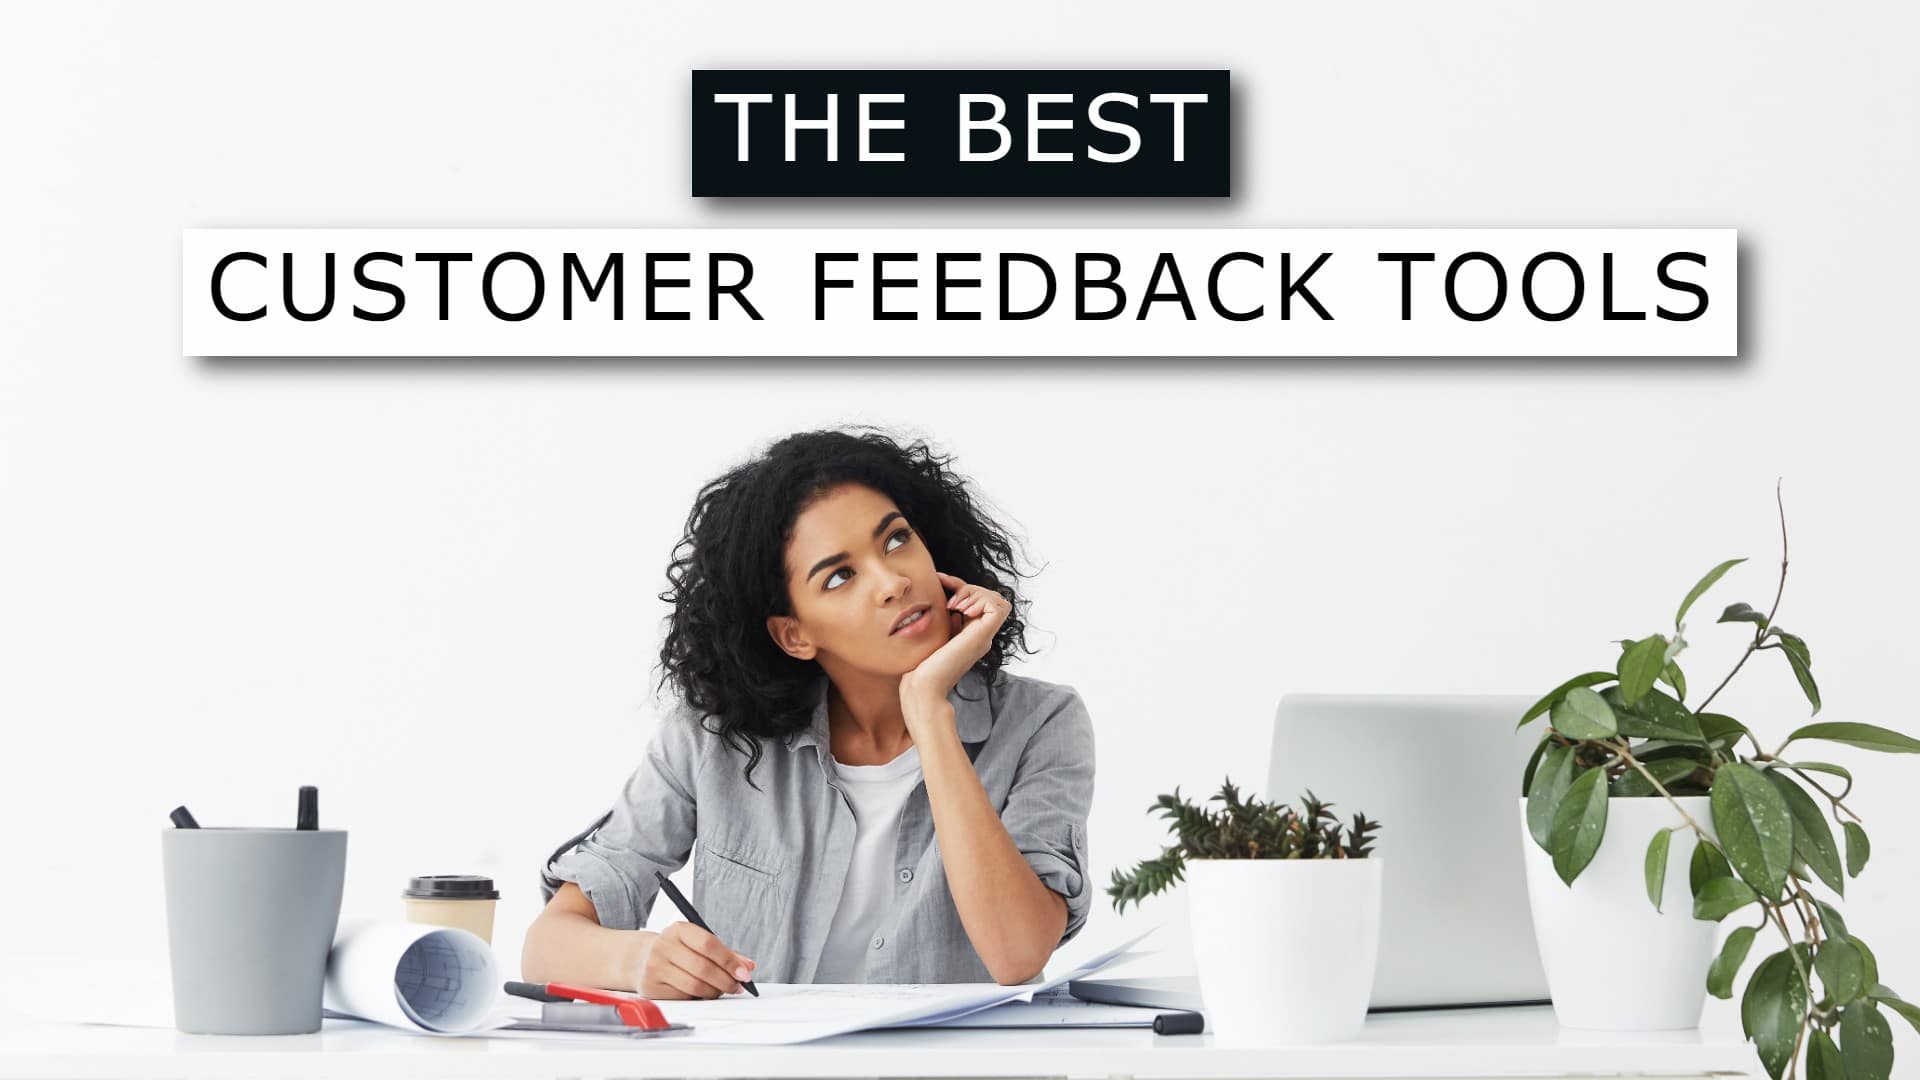 The 30 Best Customer Feedback Tools You’ll Want to Try | 2023 Updated List